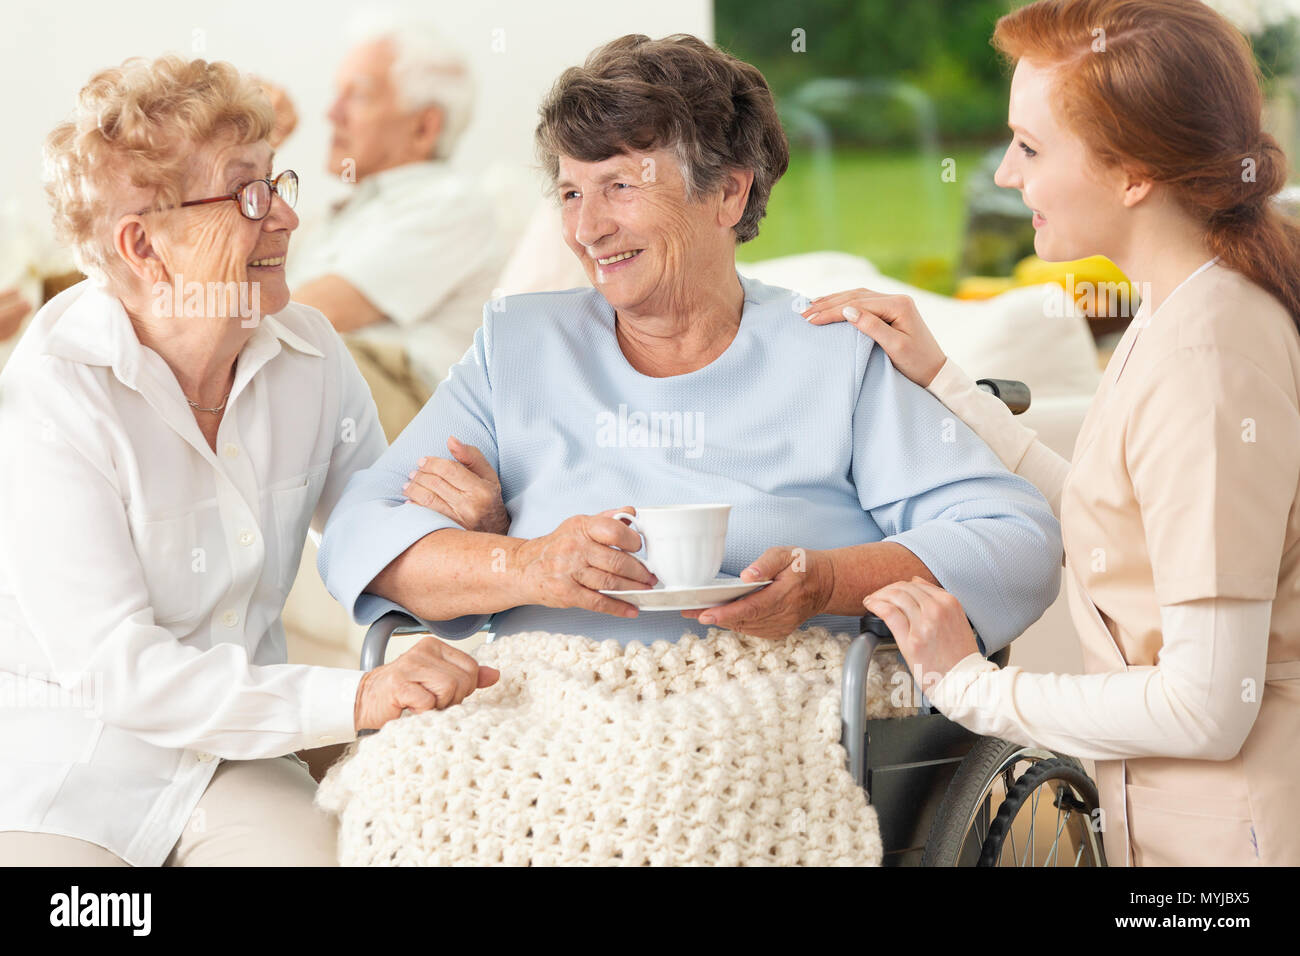 Smiling paralyzed senior woman between happy friend and nurse Stock Photo